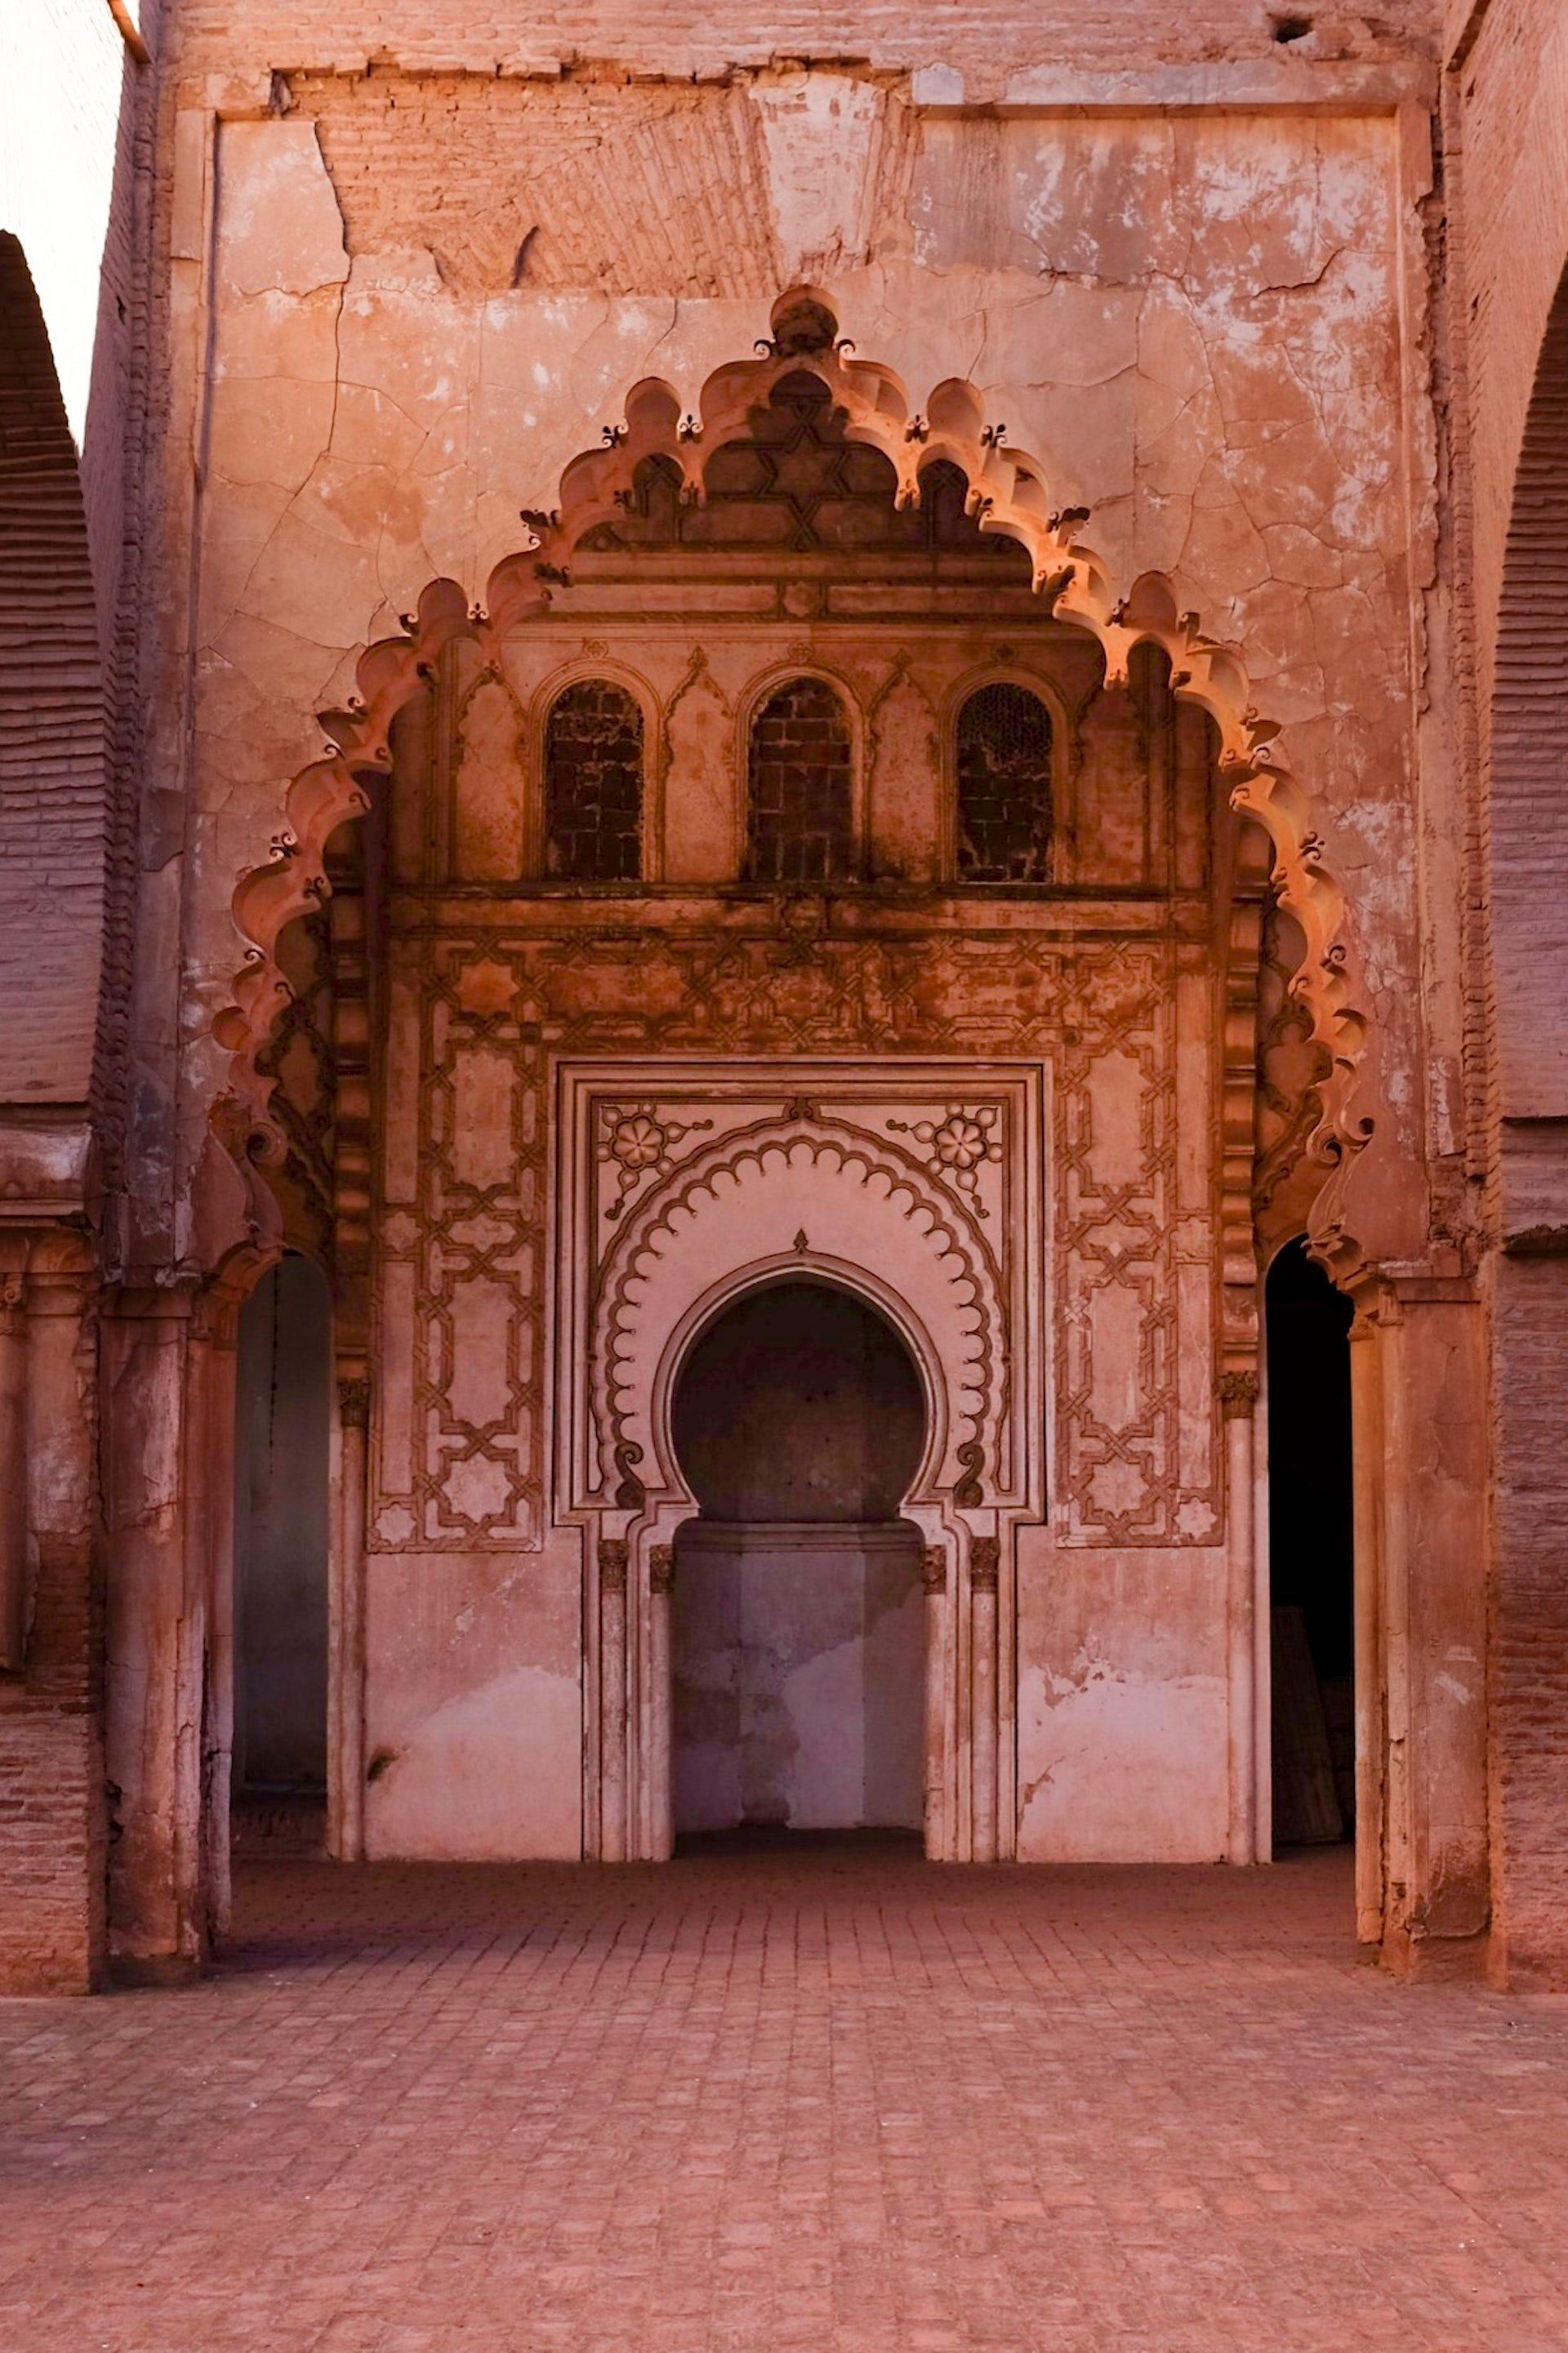 The mihrab of the Tinmel Mosque, prior to its collapse in the earthquake.